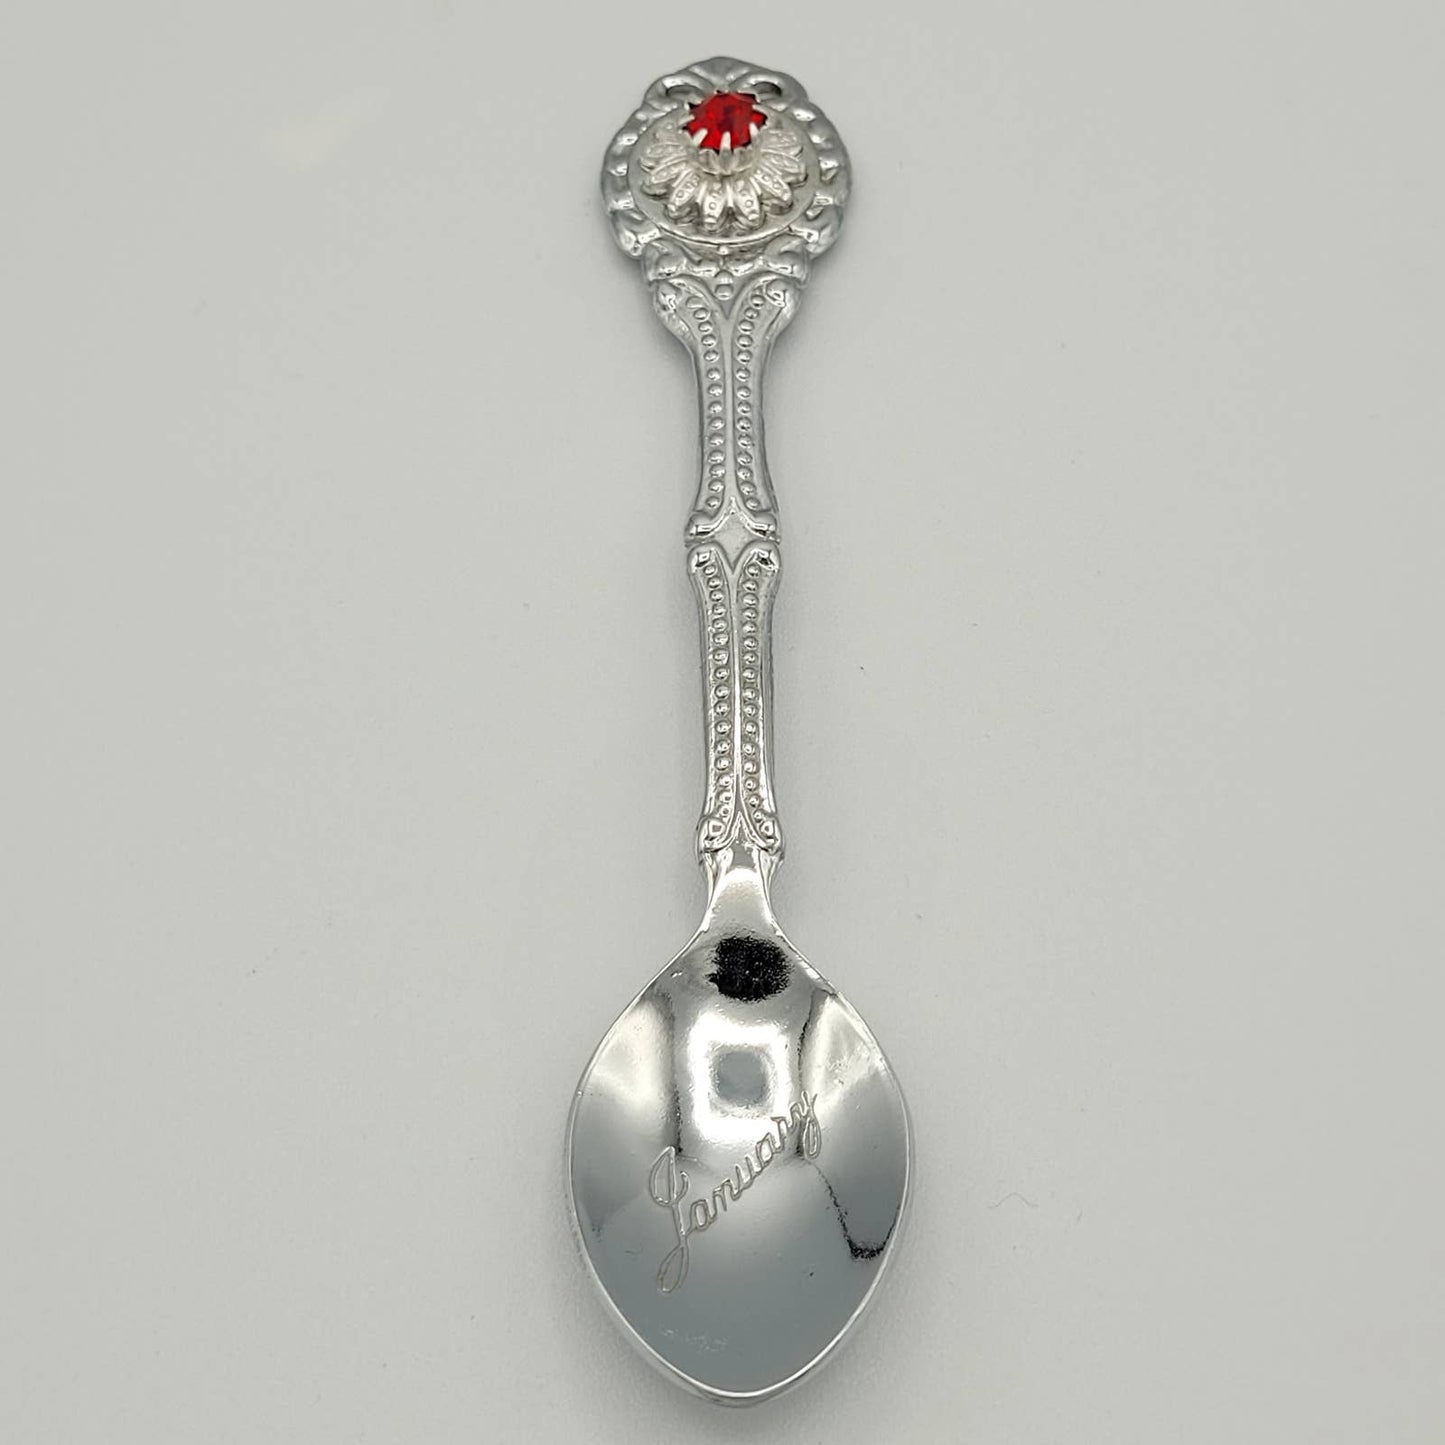 January Collectible Souvenir Spoon with Red Rhinestone